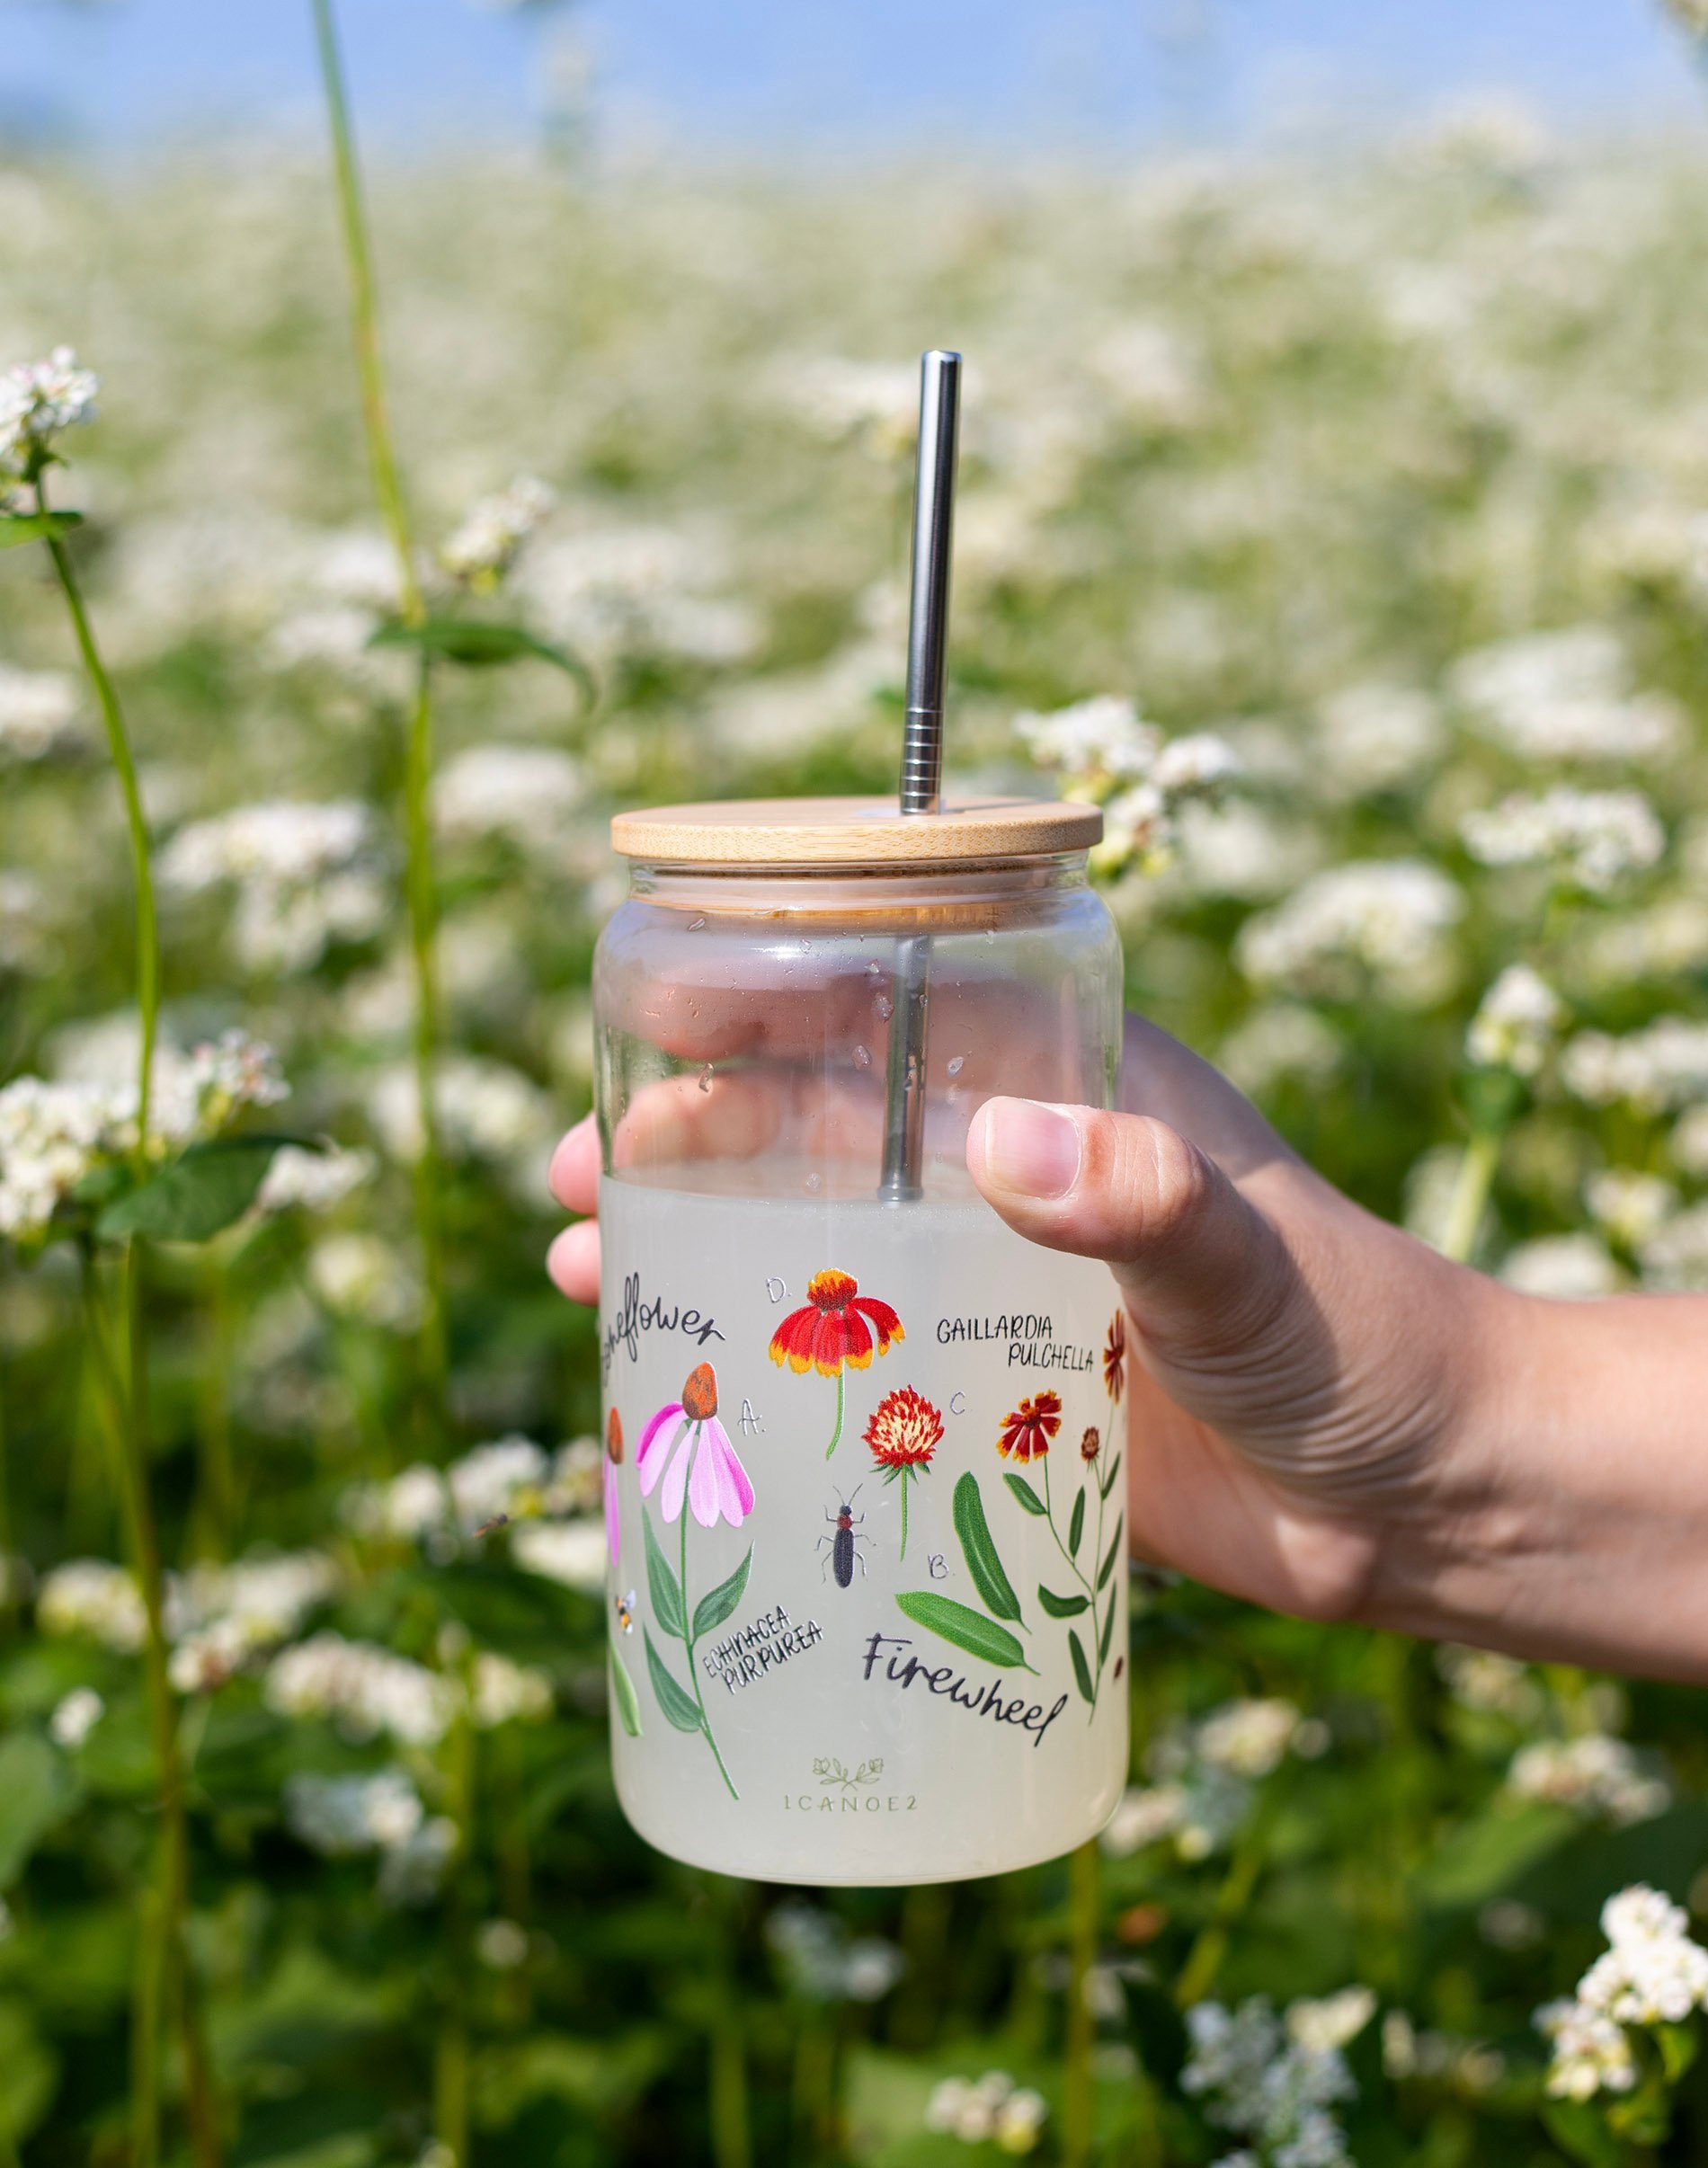 Wildflower Bouquet Trio, 16 oz Can Glass Tumbler, Iced Coffee Glass, Flower  Glassware, Floral Design Cup